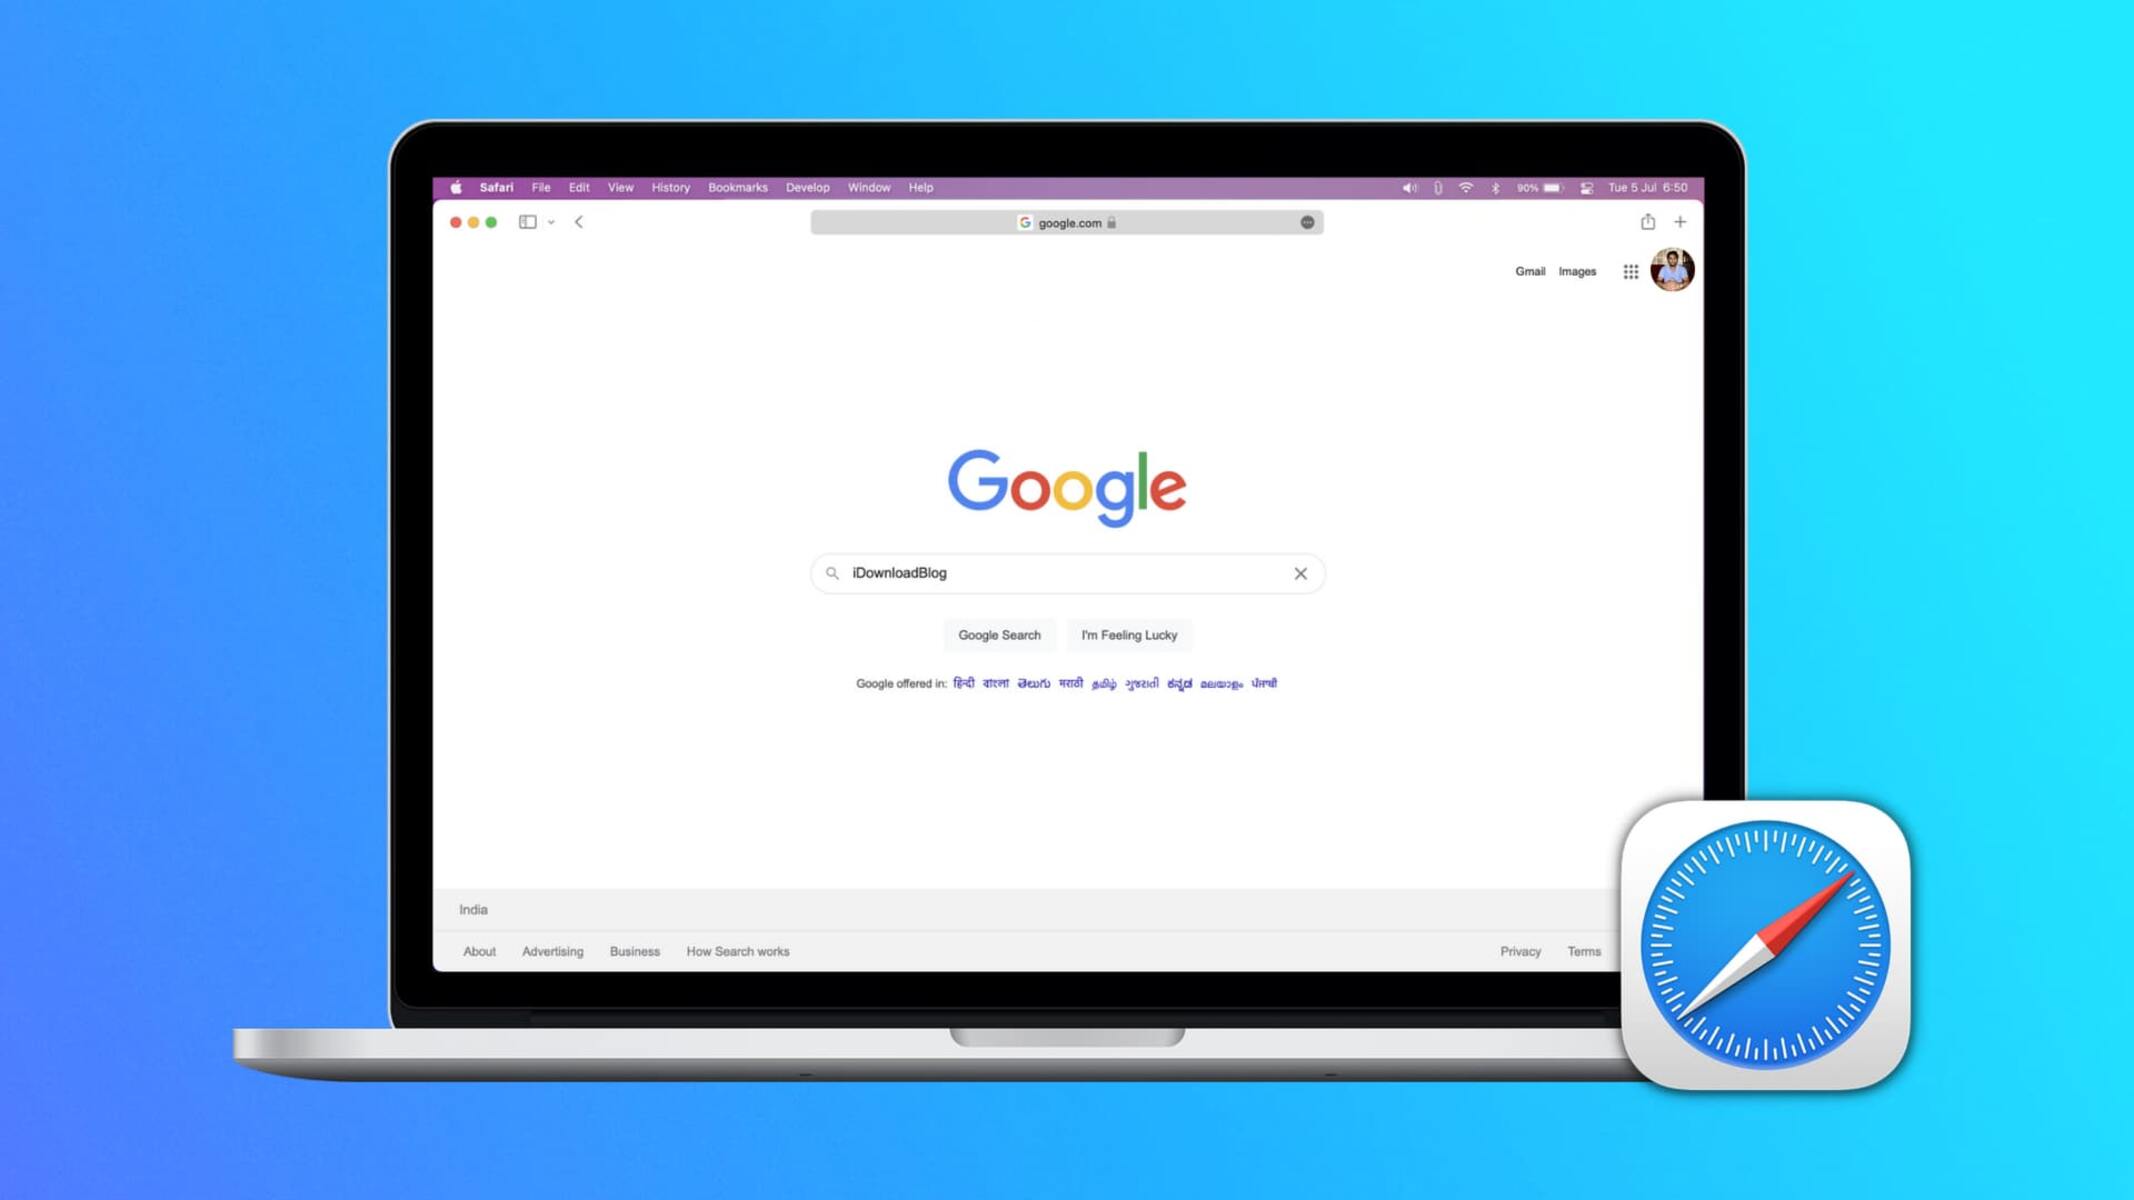 How To Make Google Your Homepage In Safari